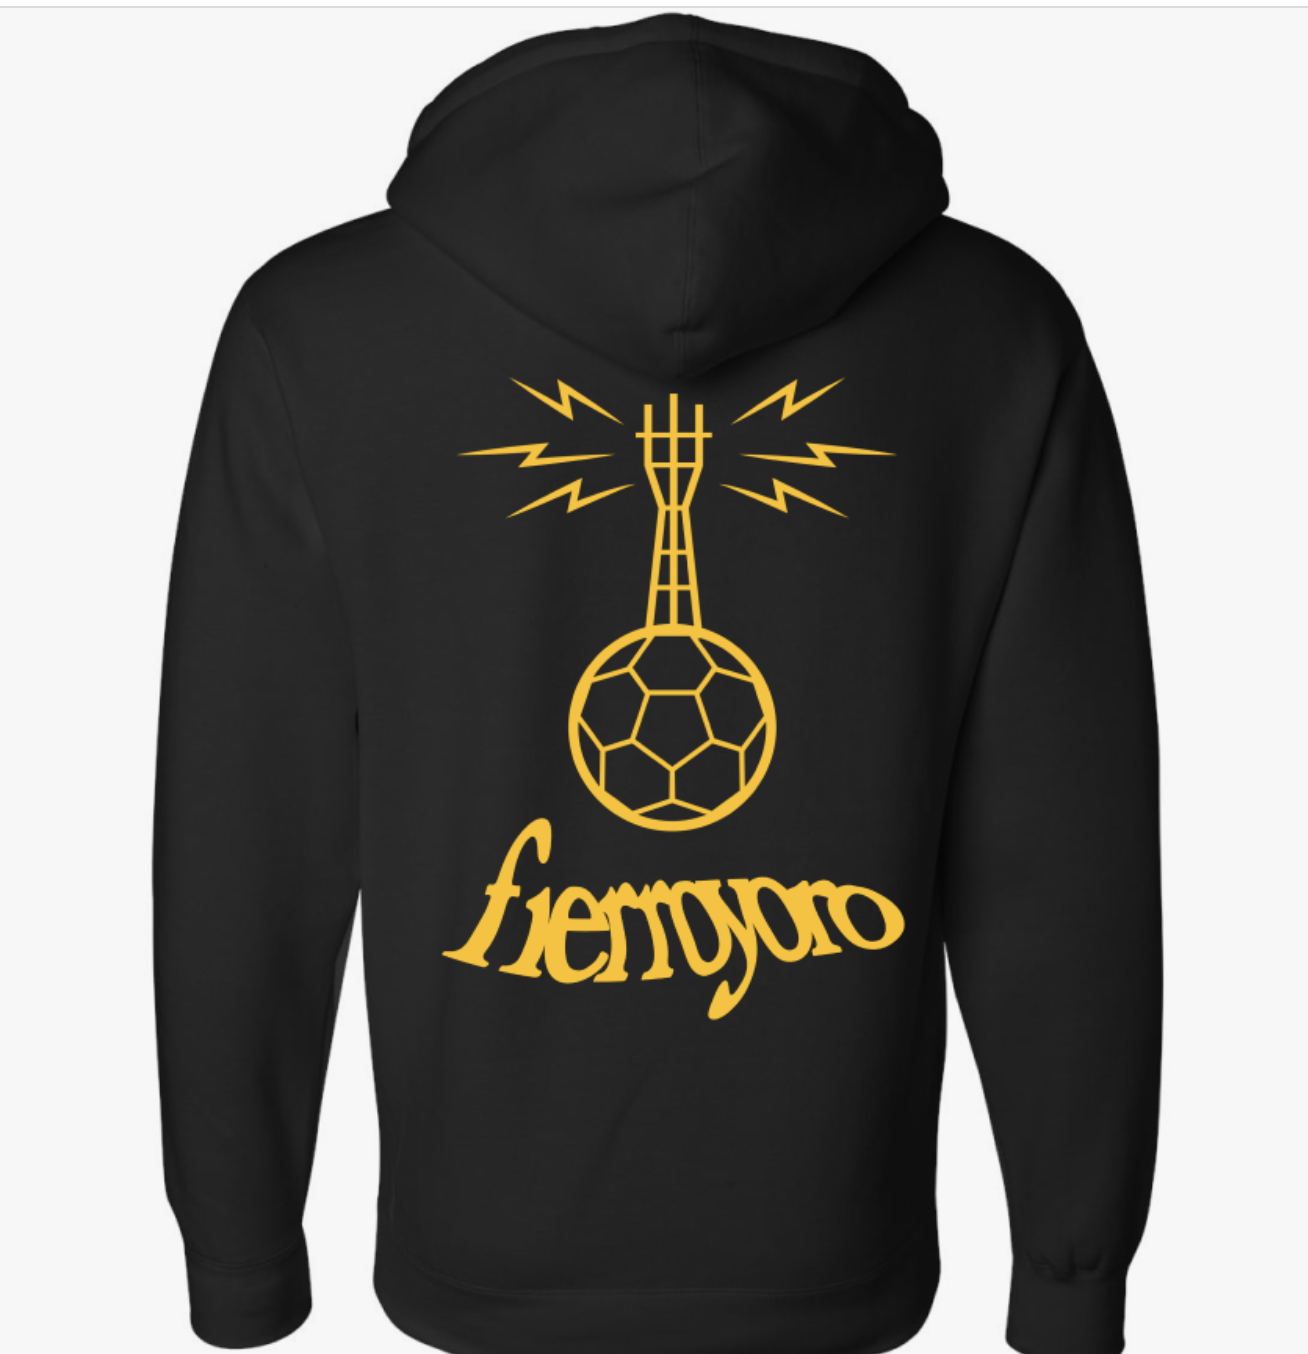 A black hoodie featuring the outline of a soccer ball and San Francisco's Sutro Tower surrounded by lightning bolts.